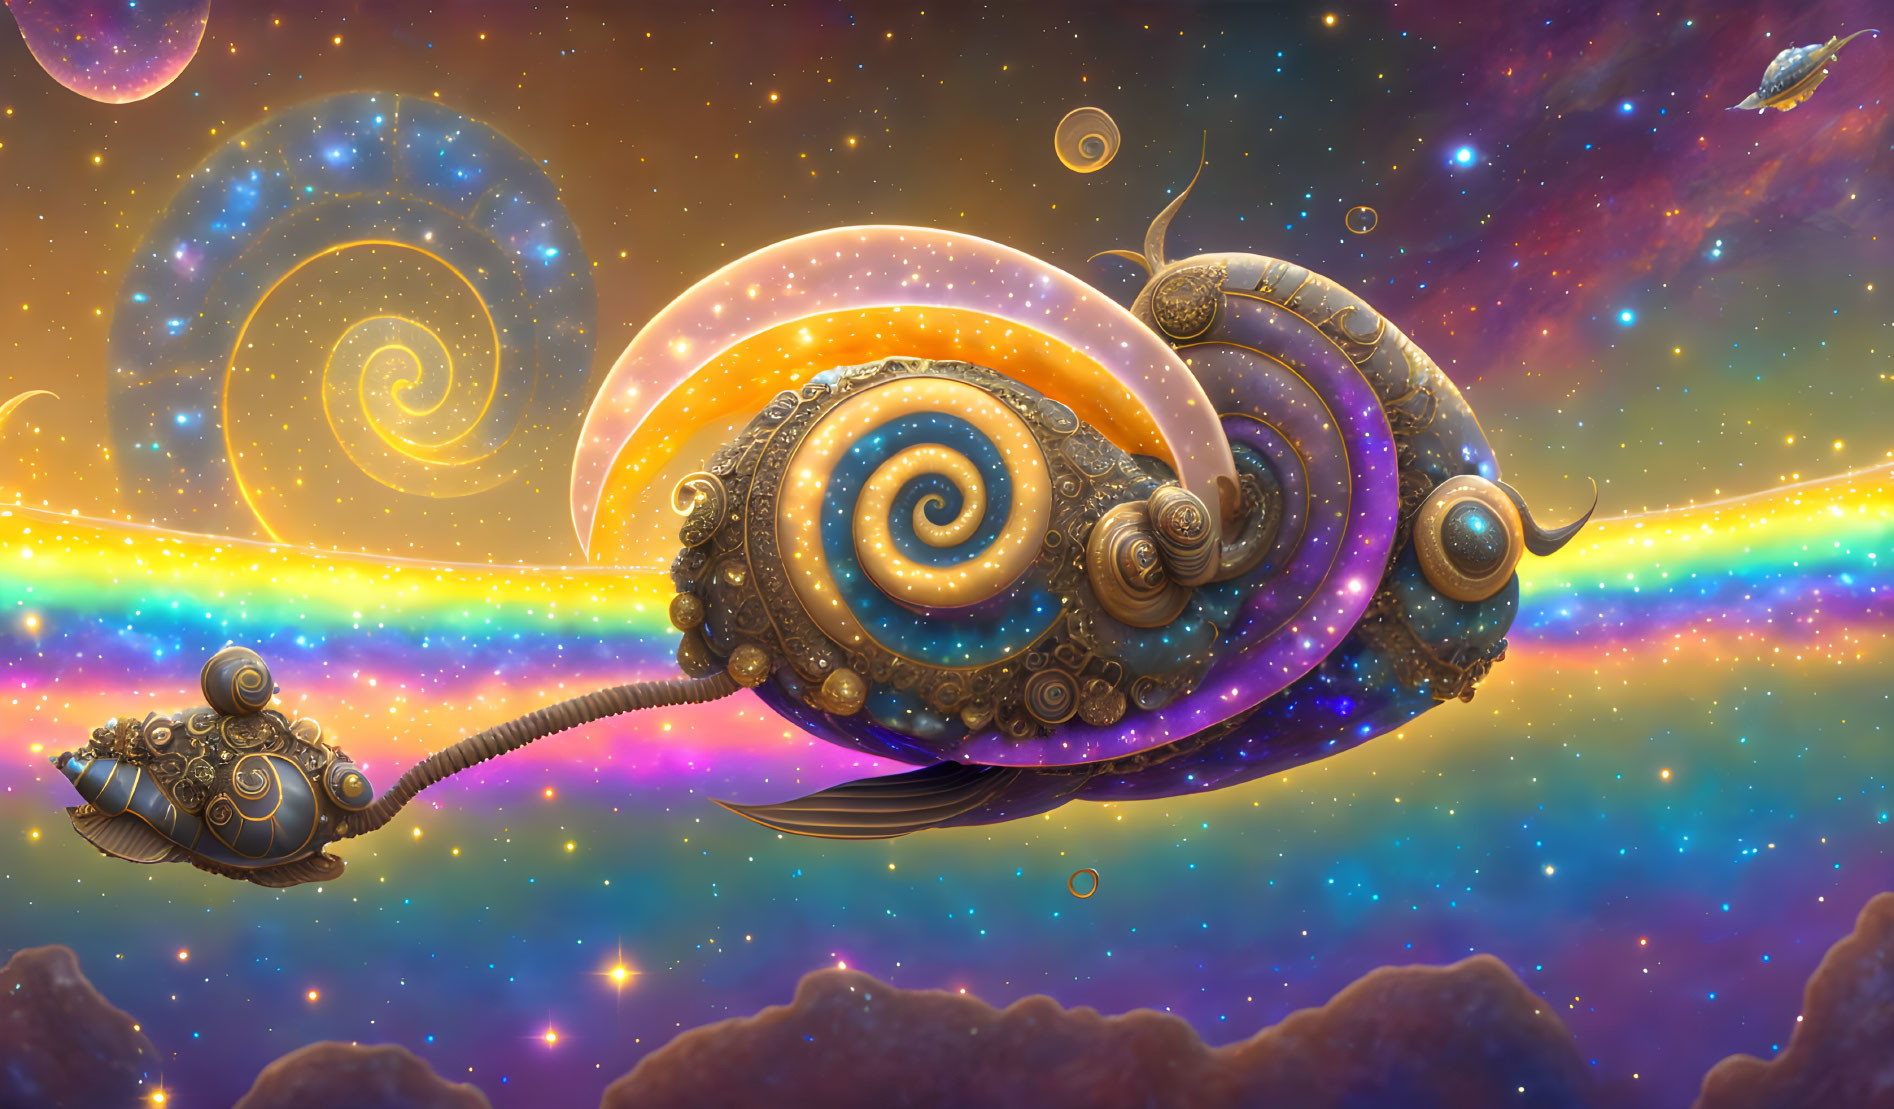 Mechanical snail with galaxy shell in cosmic scene